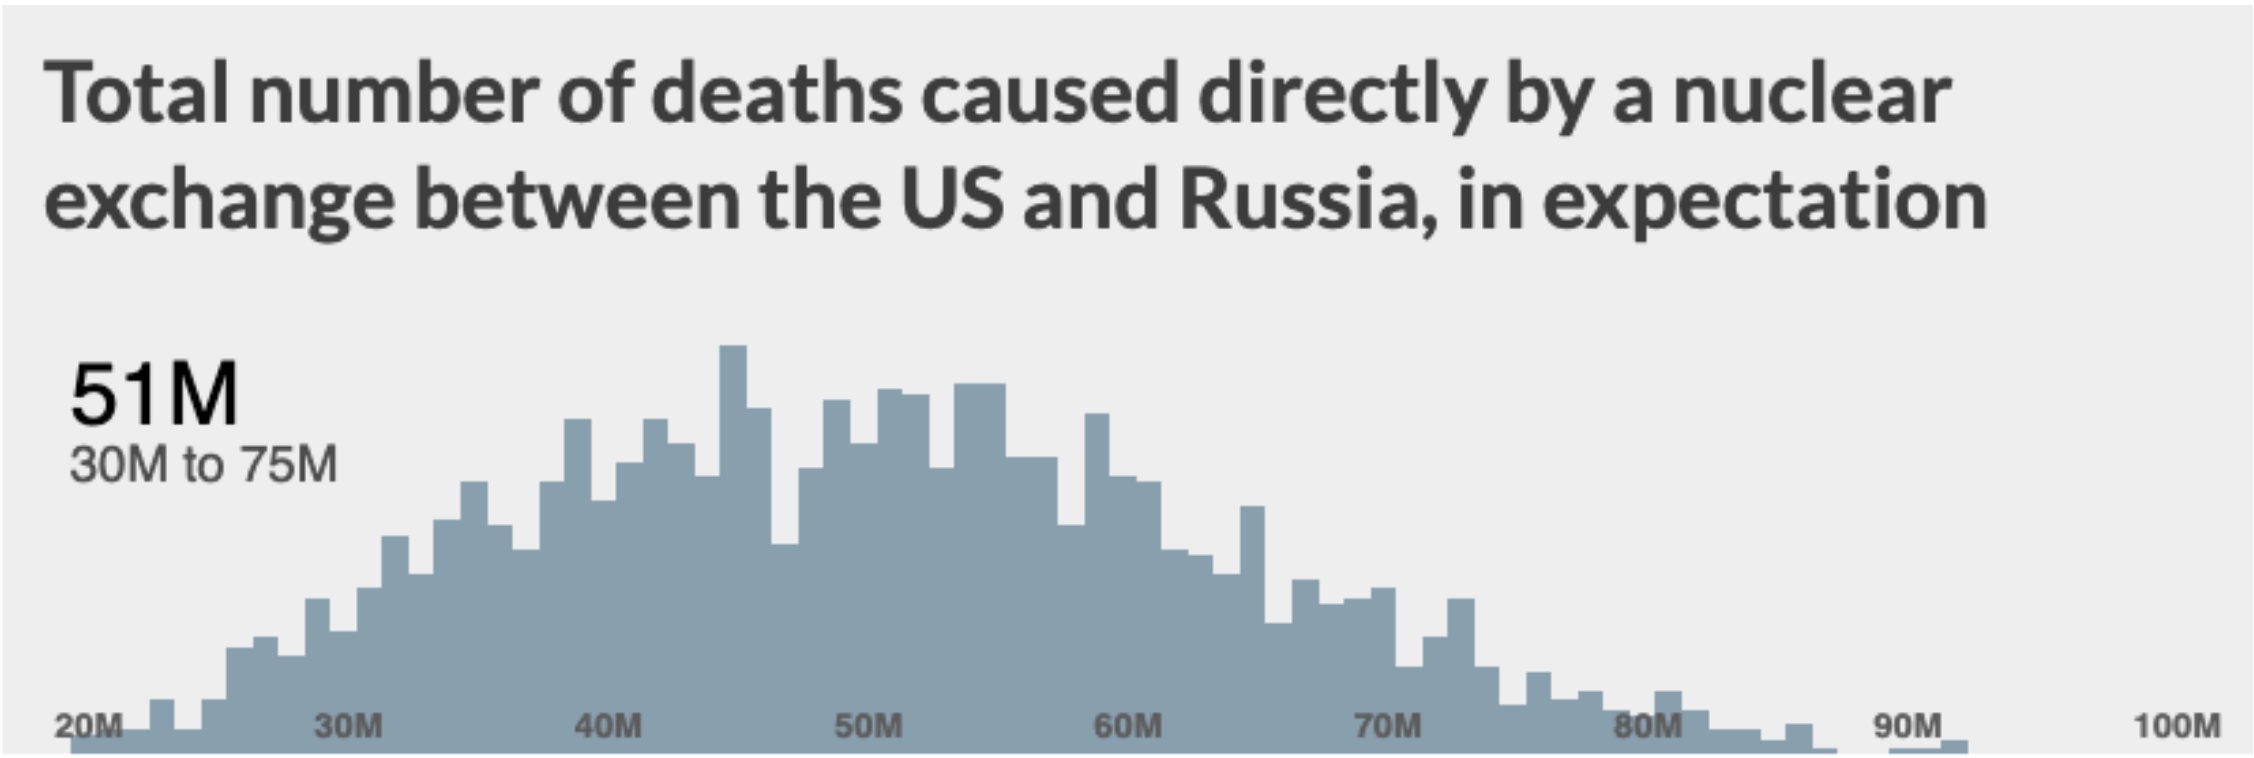 Total deaths caused directly by nuclear exchange